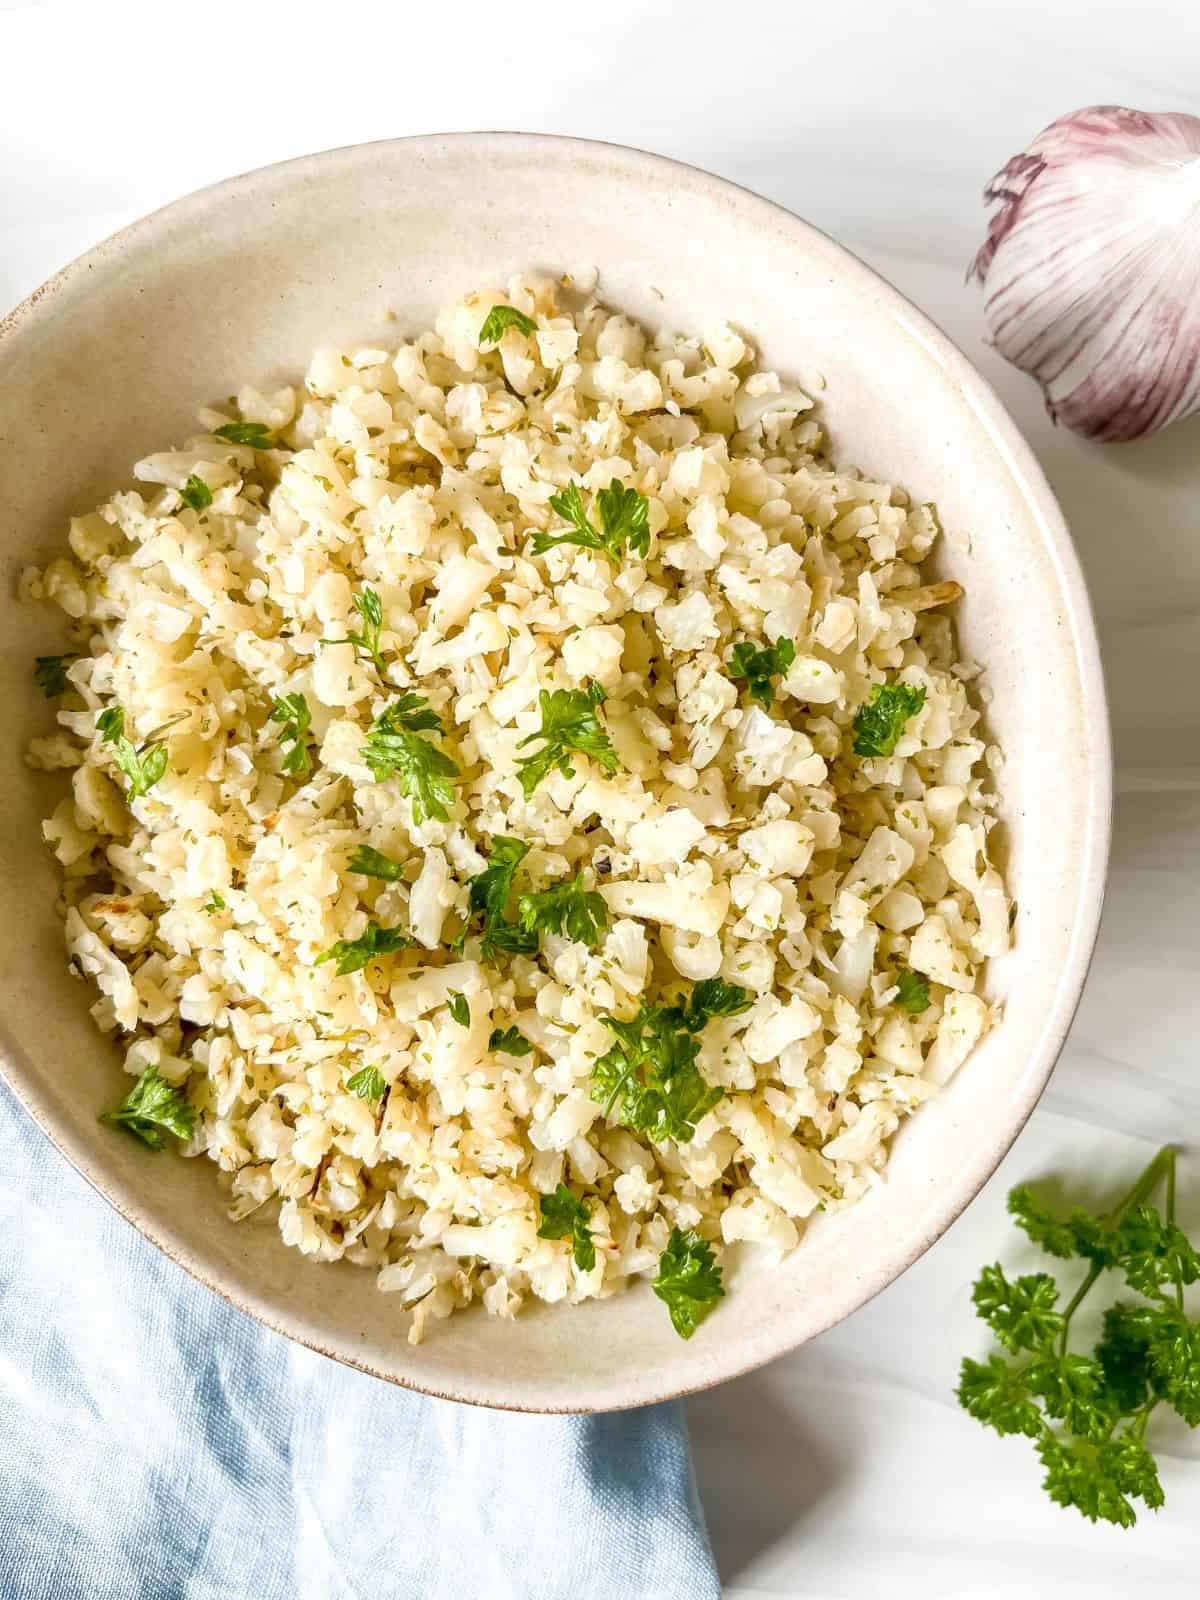 cooked frozen cauliflower rice in a cream bowl on a blue cloth next to parsley and garlic.